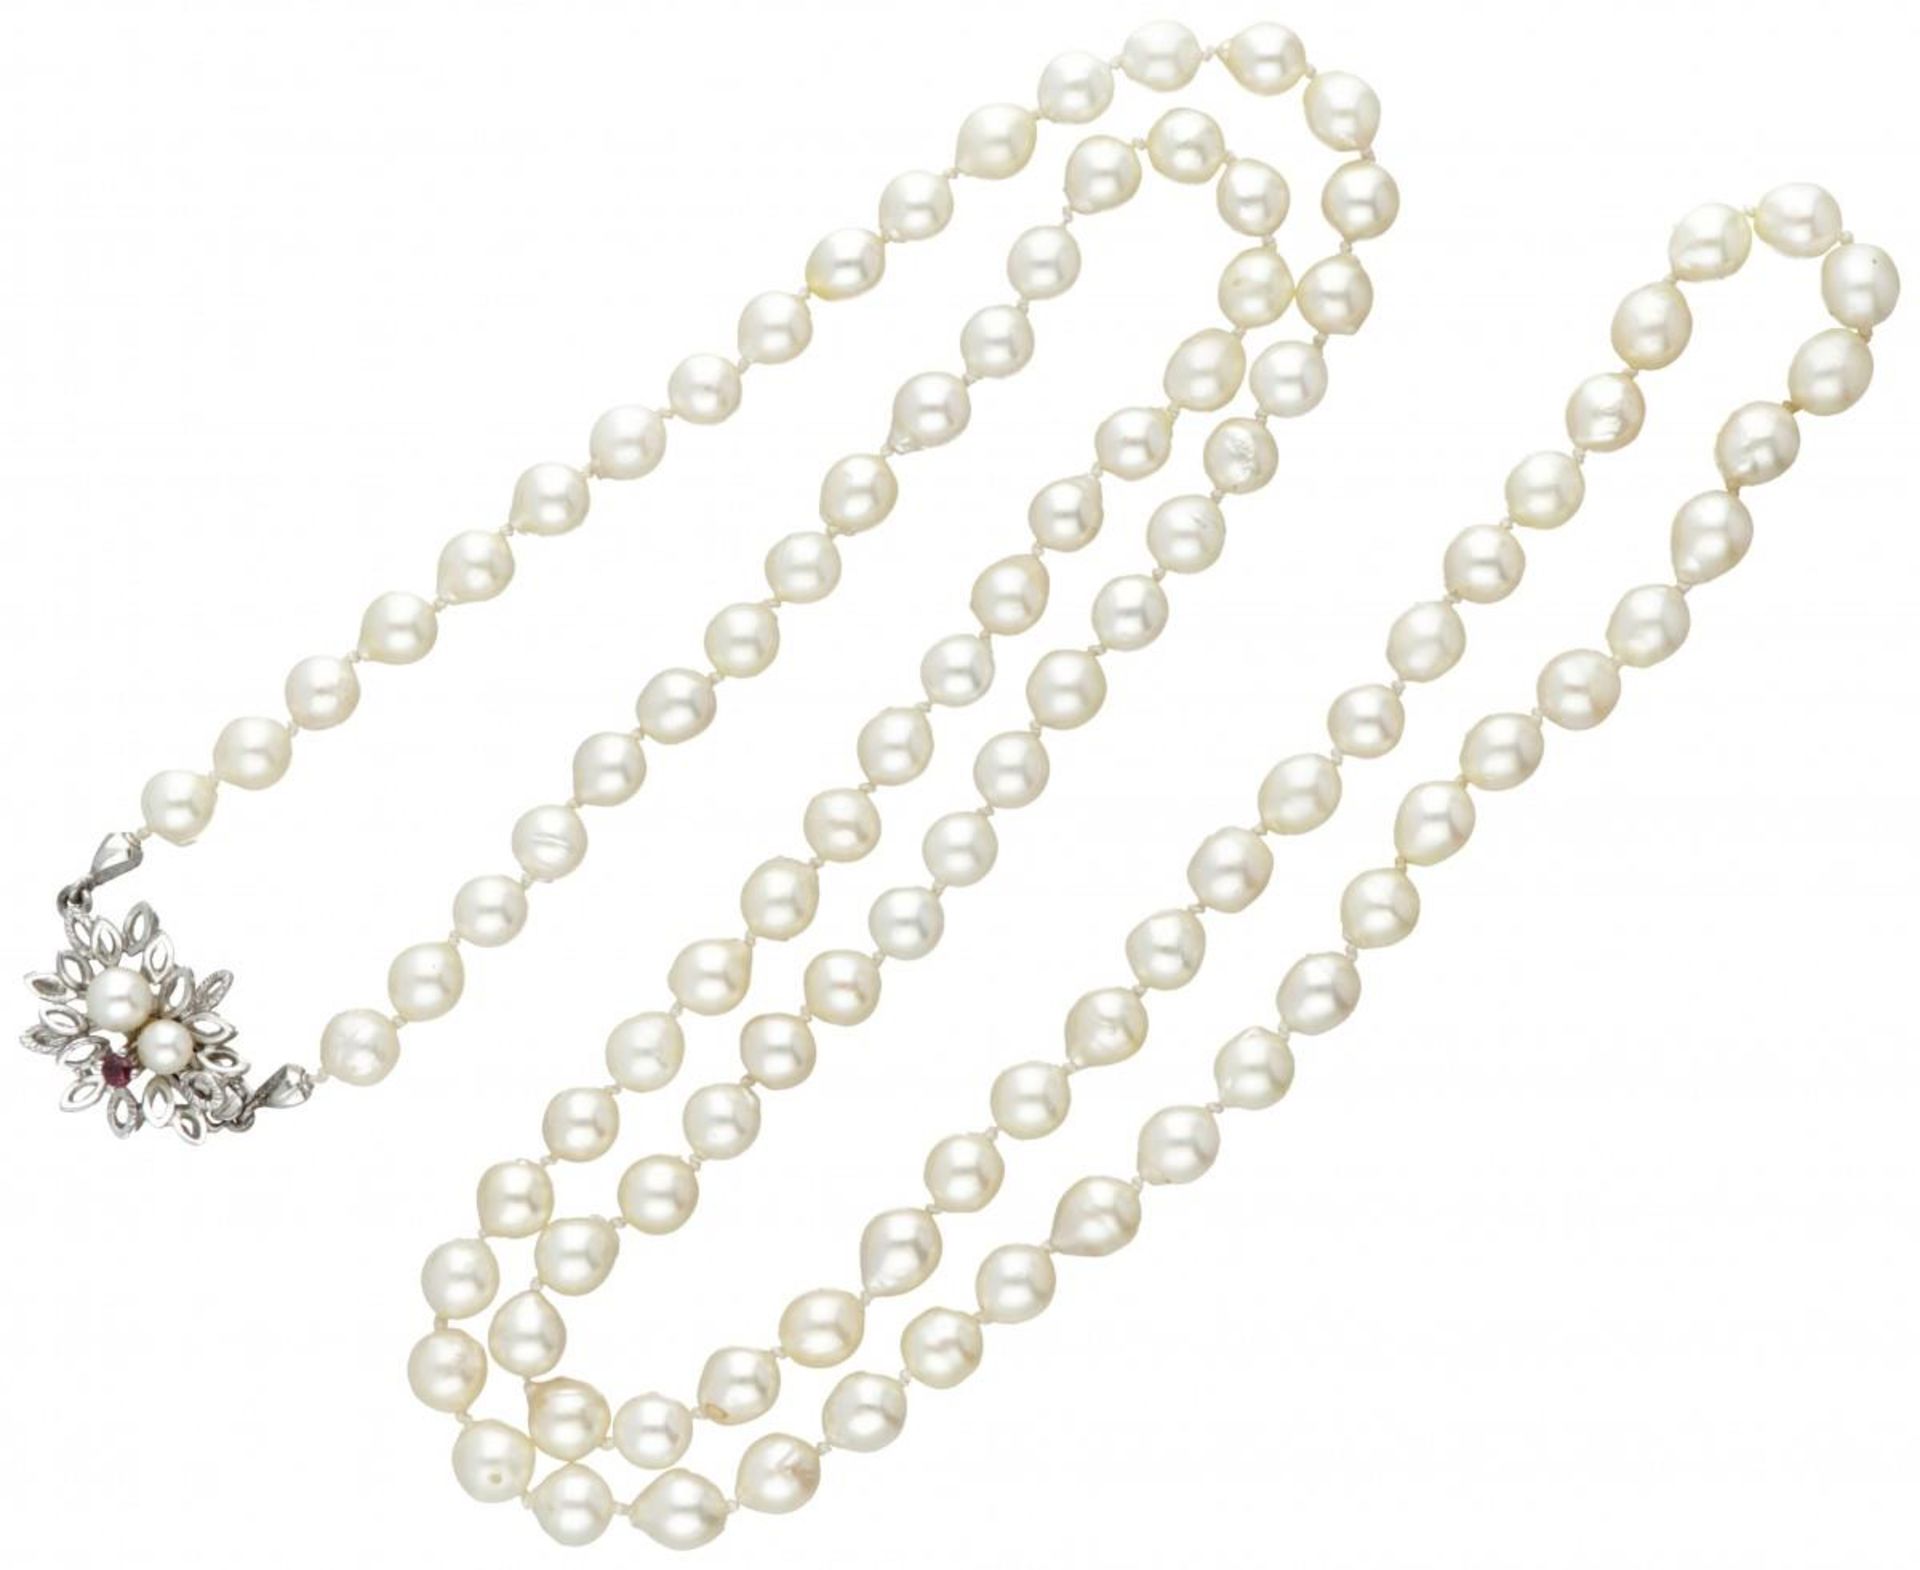 Single strand pearl necklace with a 14K. white gold closure set with pearl and ruby. - Image 3 of 3